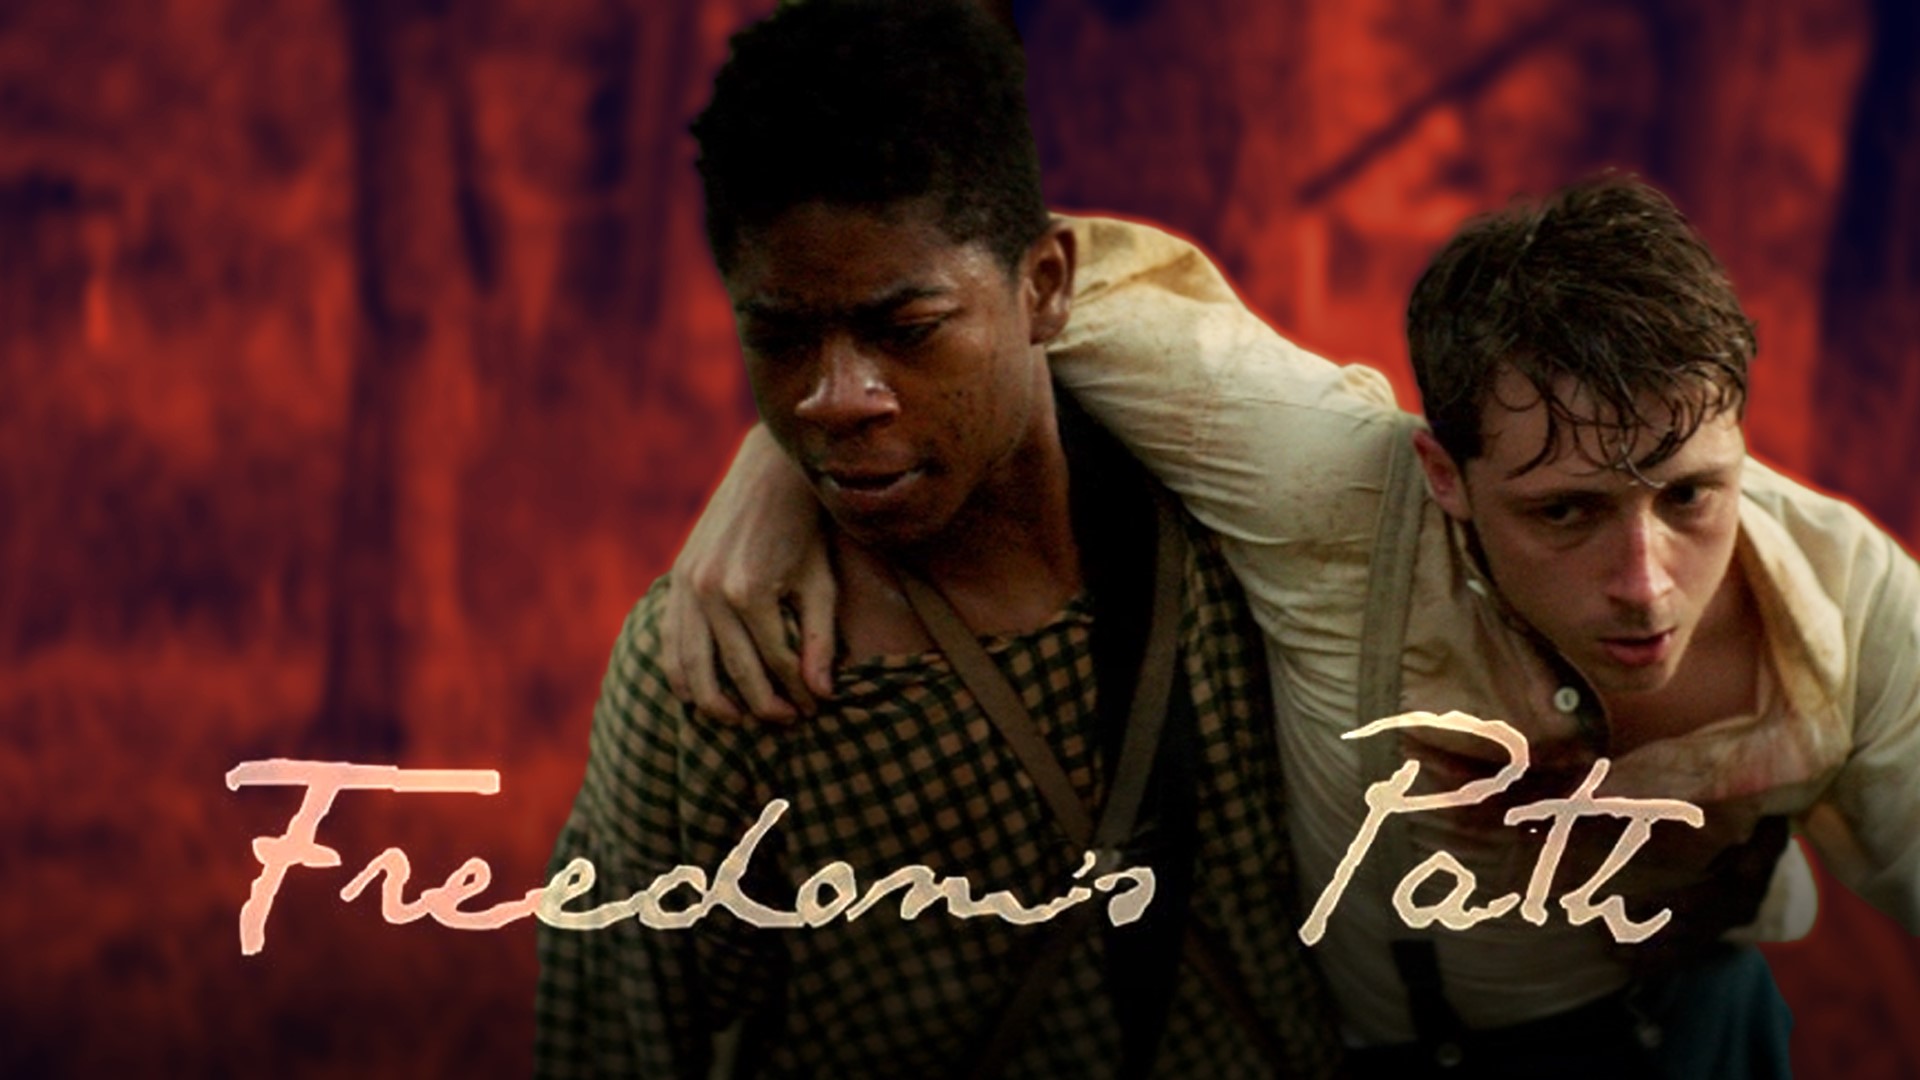 Shot in Arkansas, Freedom's Path is a visually-rich story set during the Civil War, starring RJ Cyler and directed by Brett Smith.